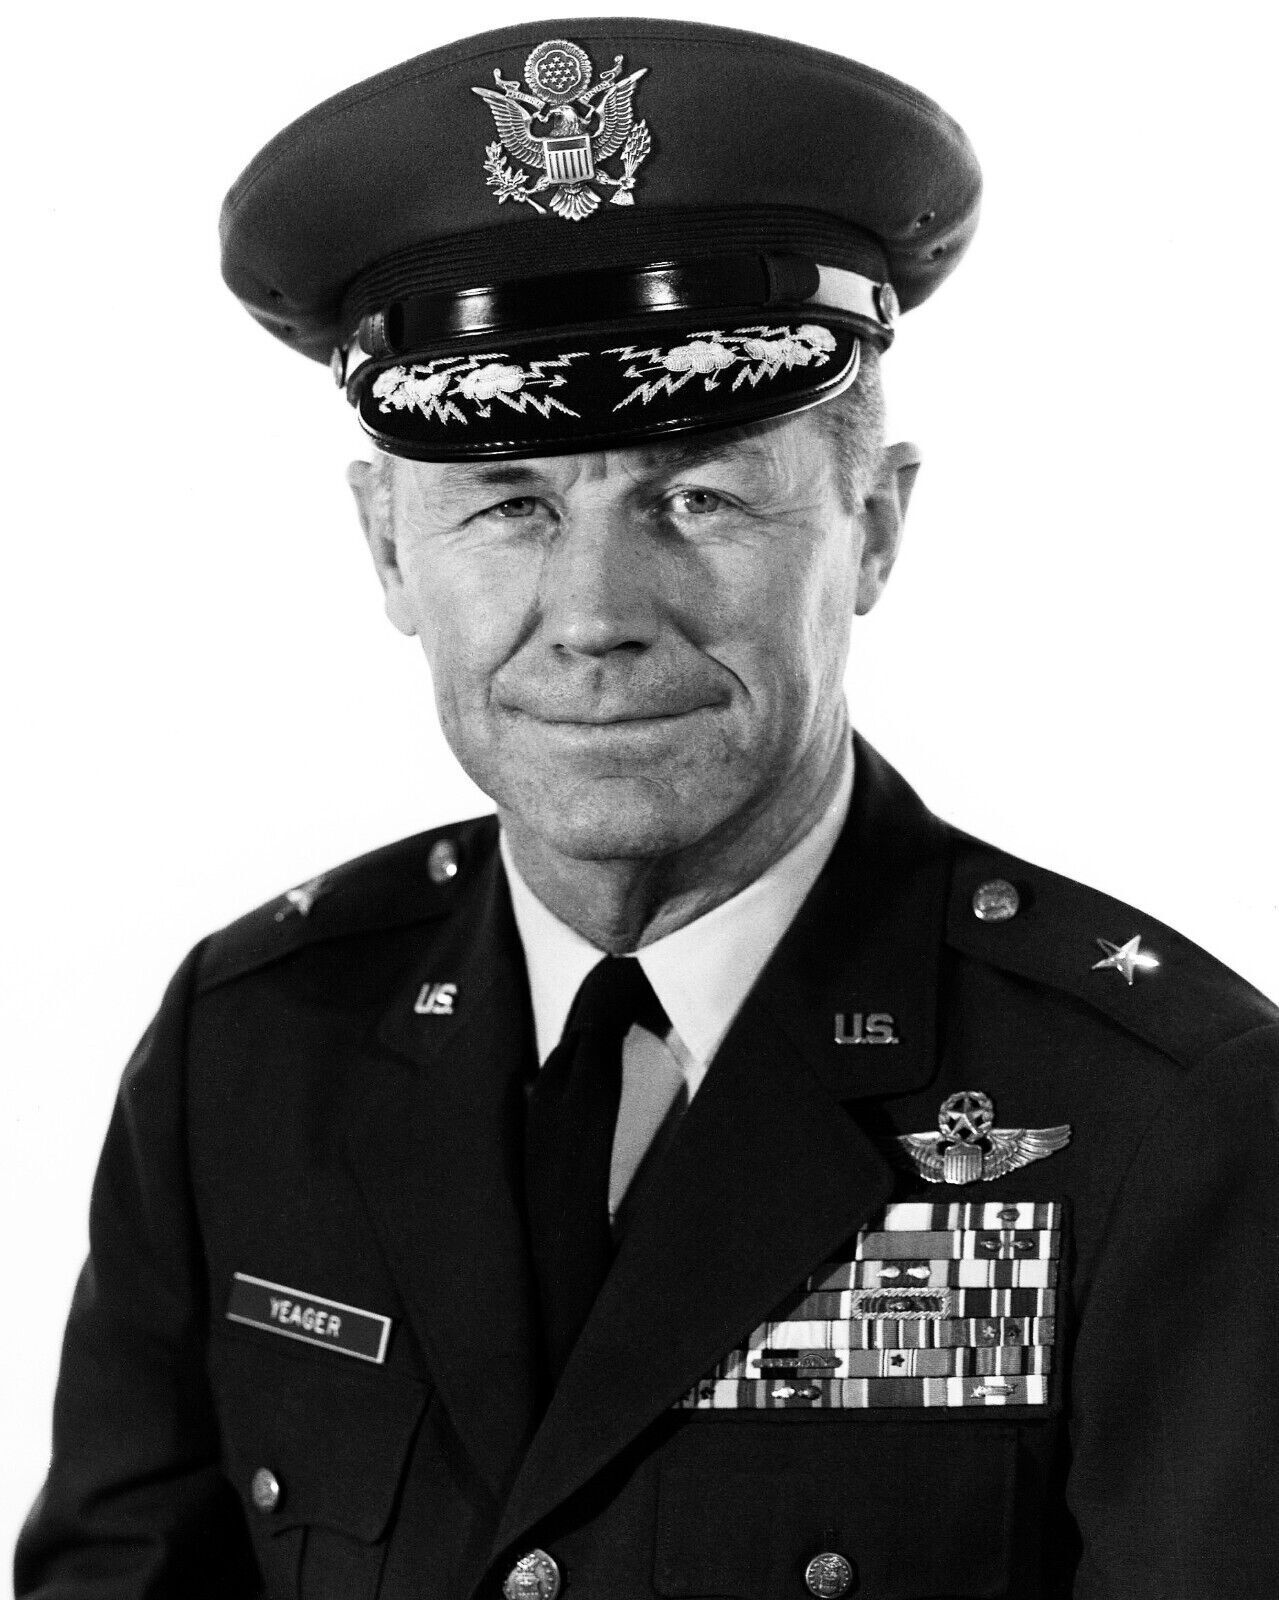 GENERAL CHUCK YEAGER AIR FORCE FLYING ACE IN UNIFORM 8X10 PHOTOGRAPH REPRINT